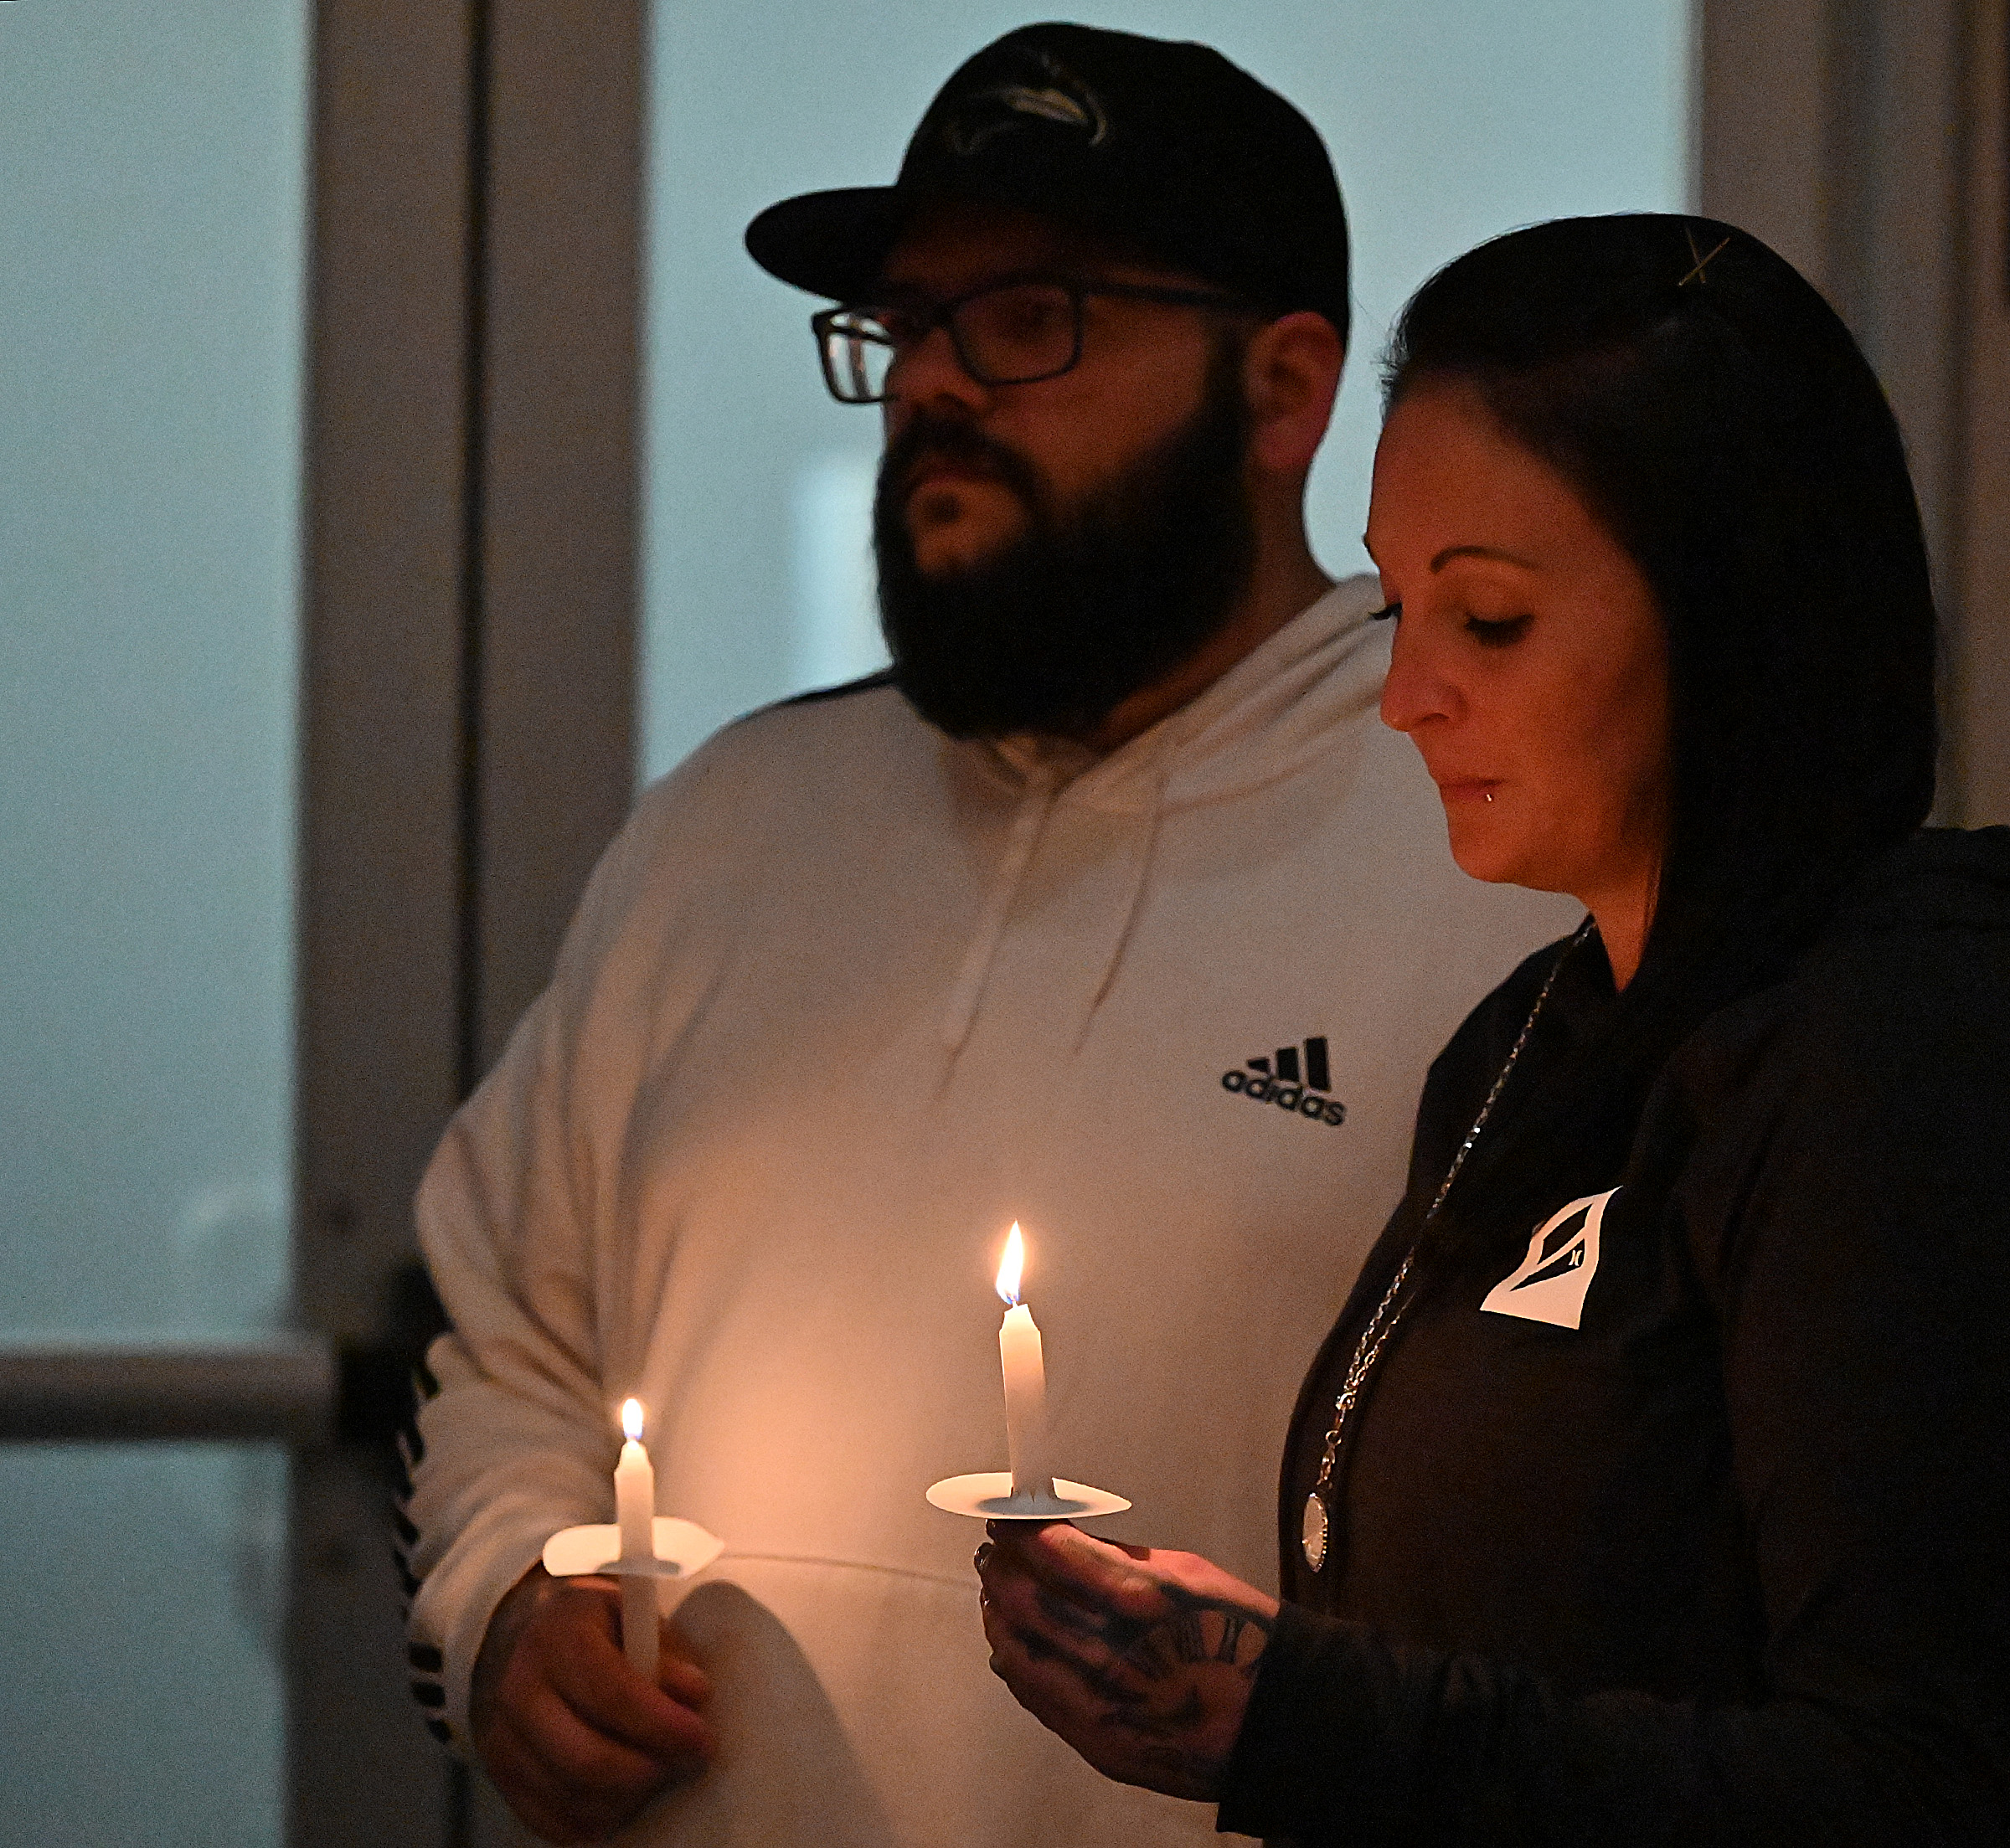 Friends and loved ones who lost someone to drug overdose, light candles in their memory at the 9th Annual Drug Overdose and Prevention Vigil Tuesday at Portico at St. John in Westminster. (Jeffrey F. Bill/Staff photo)